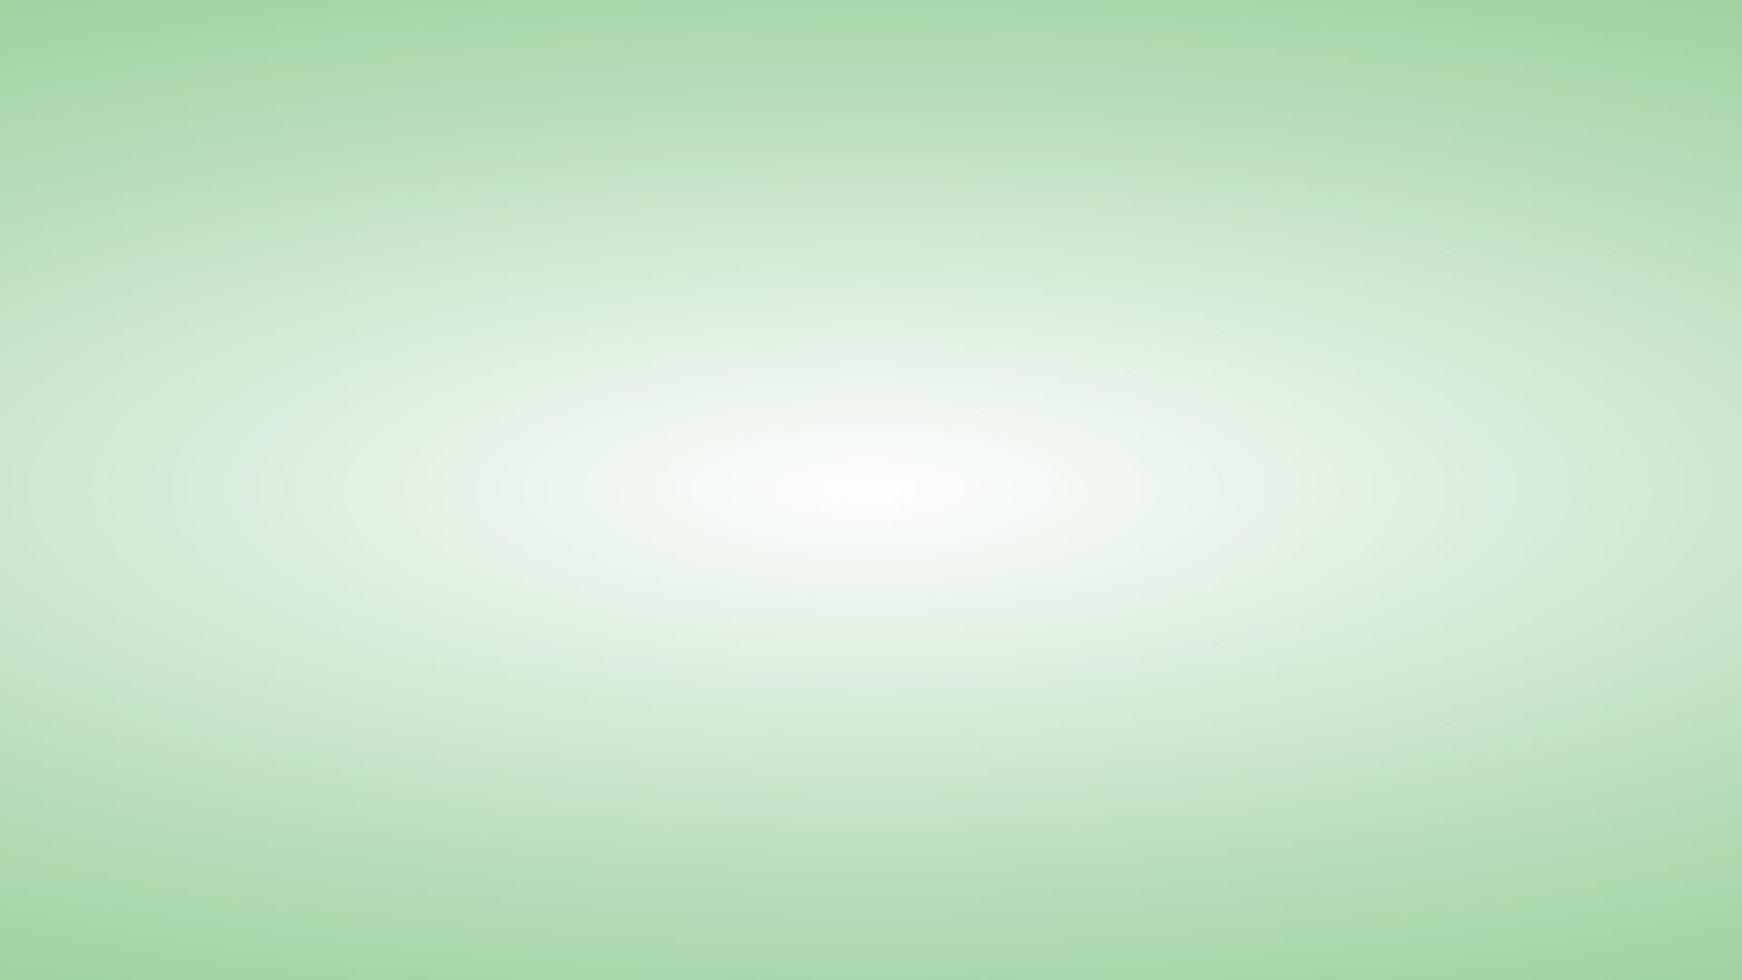 Sweet Soft Green Gradient Abstract Background Wallpaper vector